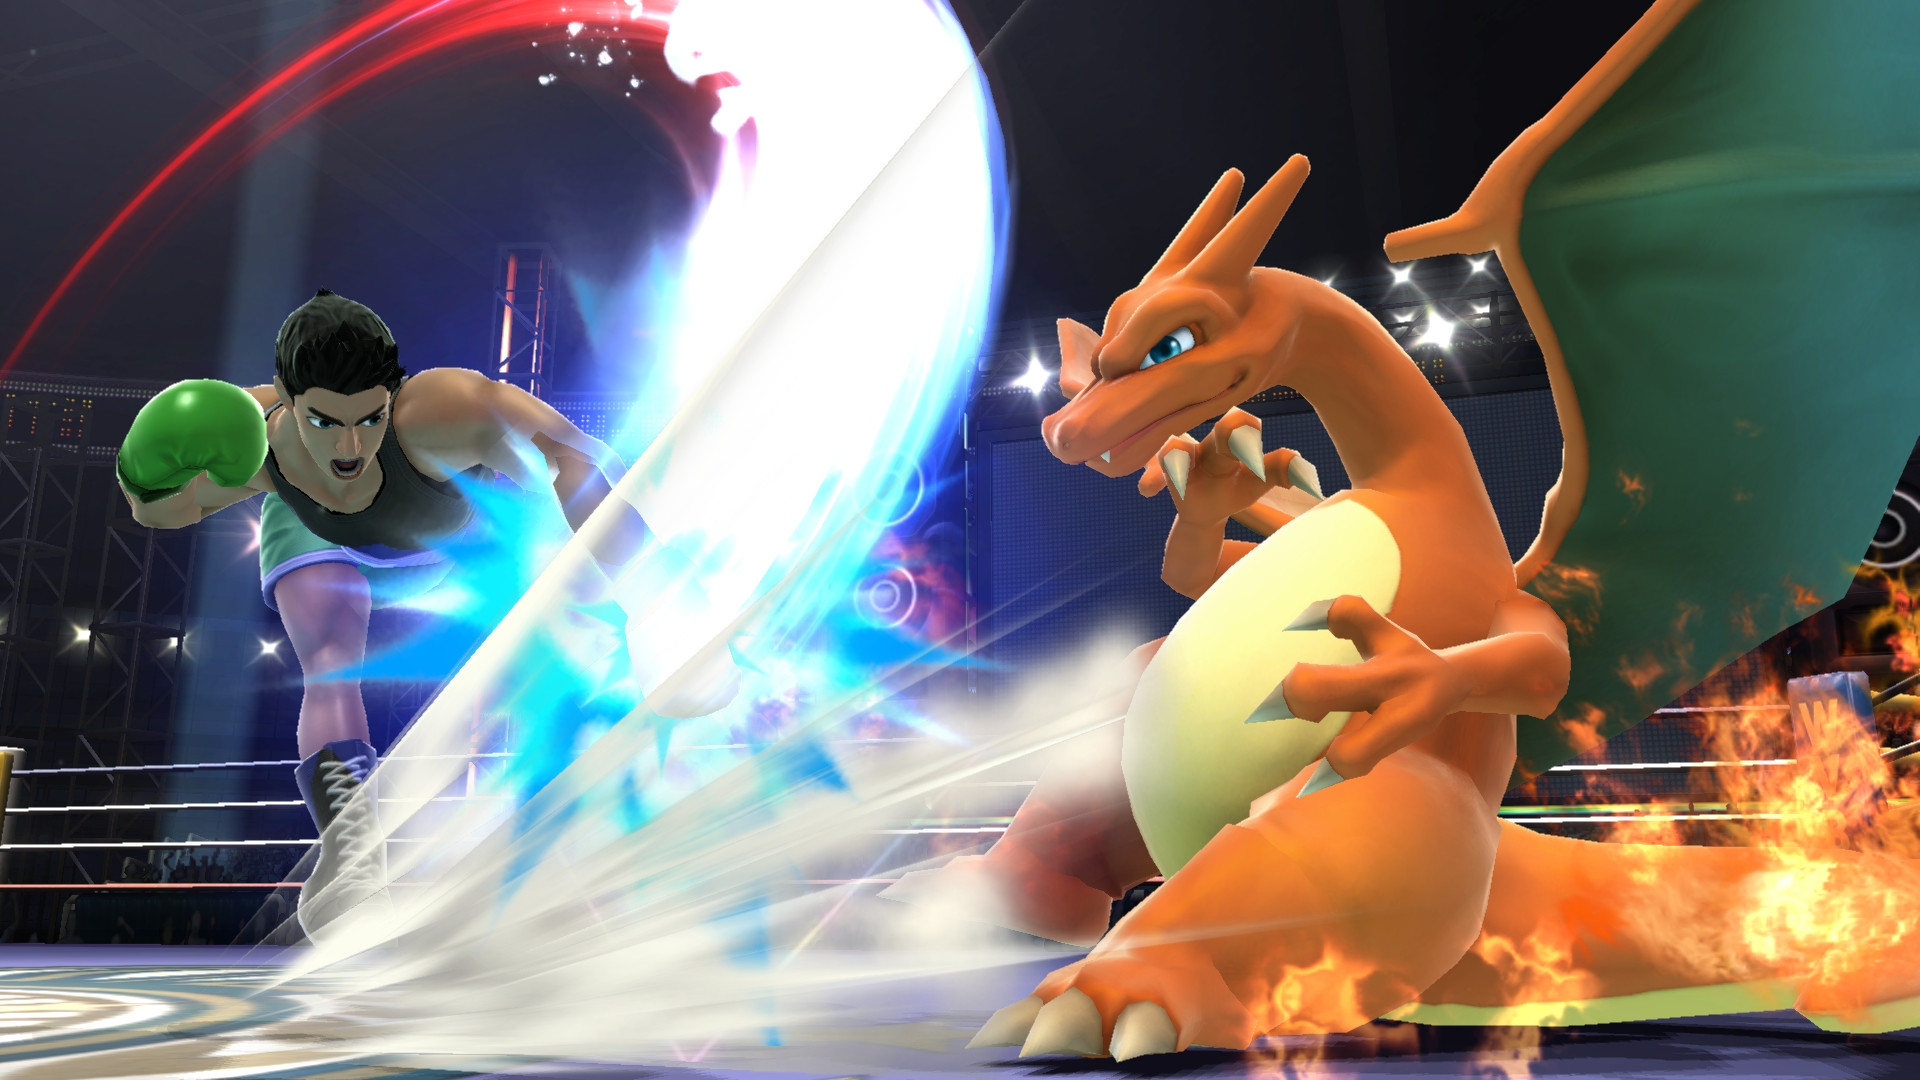 Disney XD to air the finals of Evo's Super Smash Bros. for Wii U